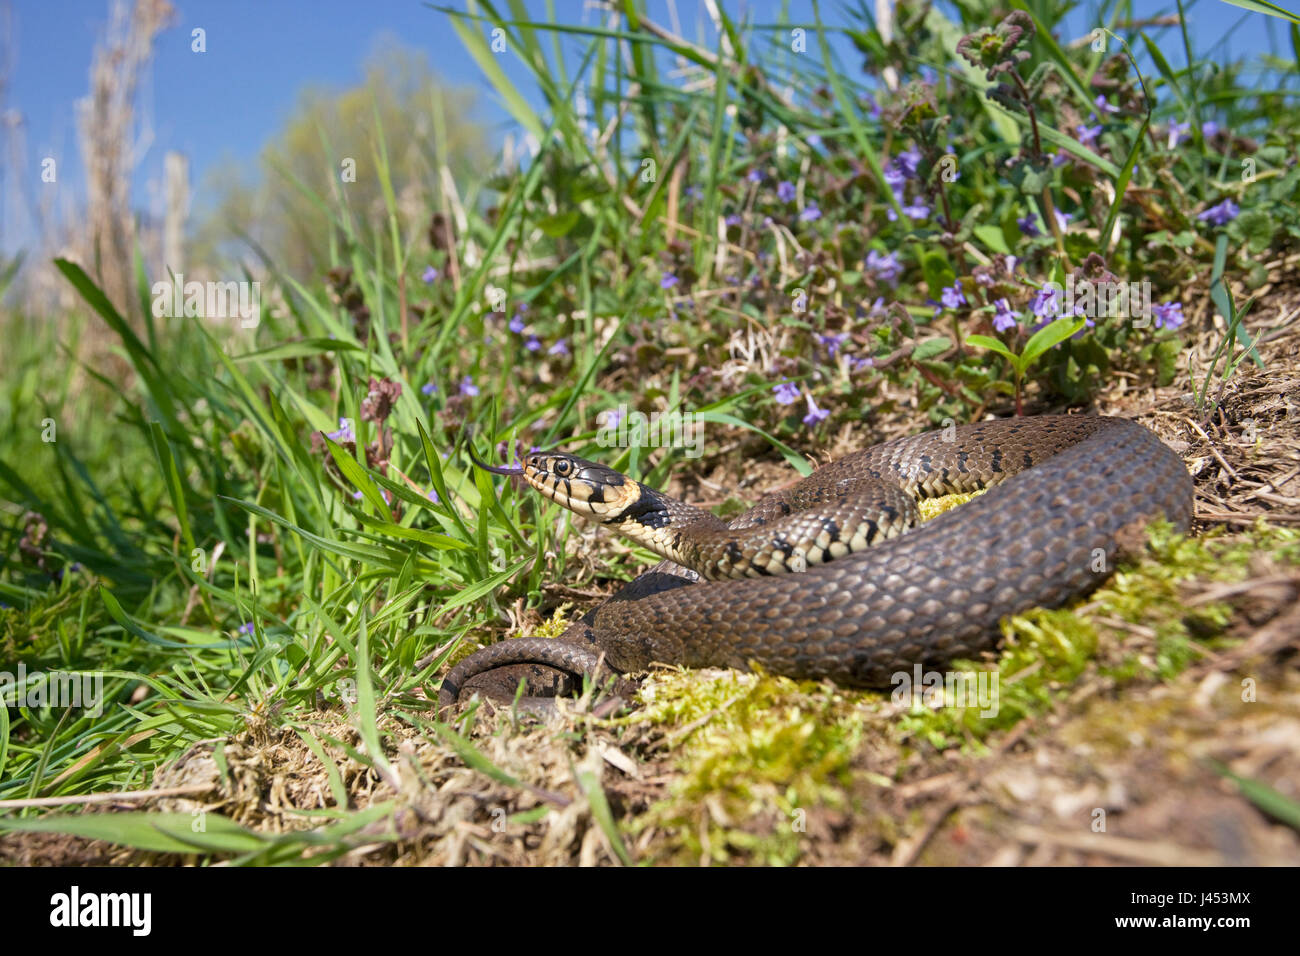 photo of a basking grass snake between grass and purple flowers Stock Photo